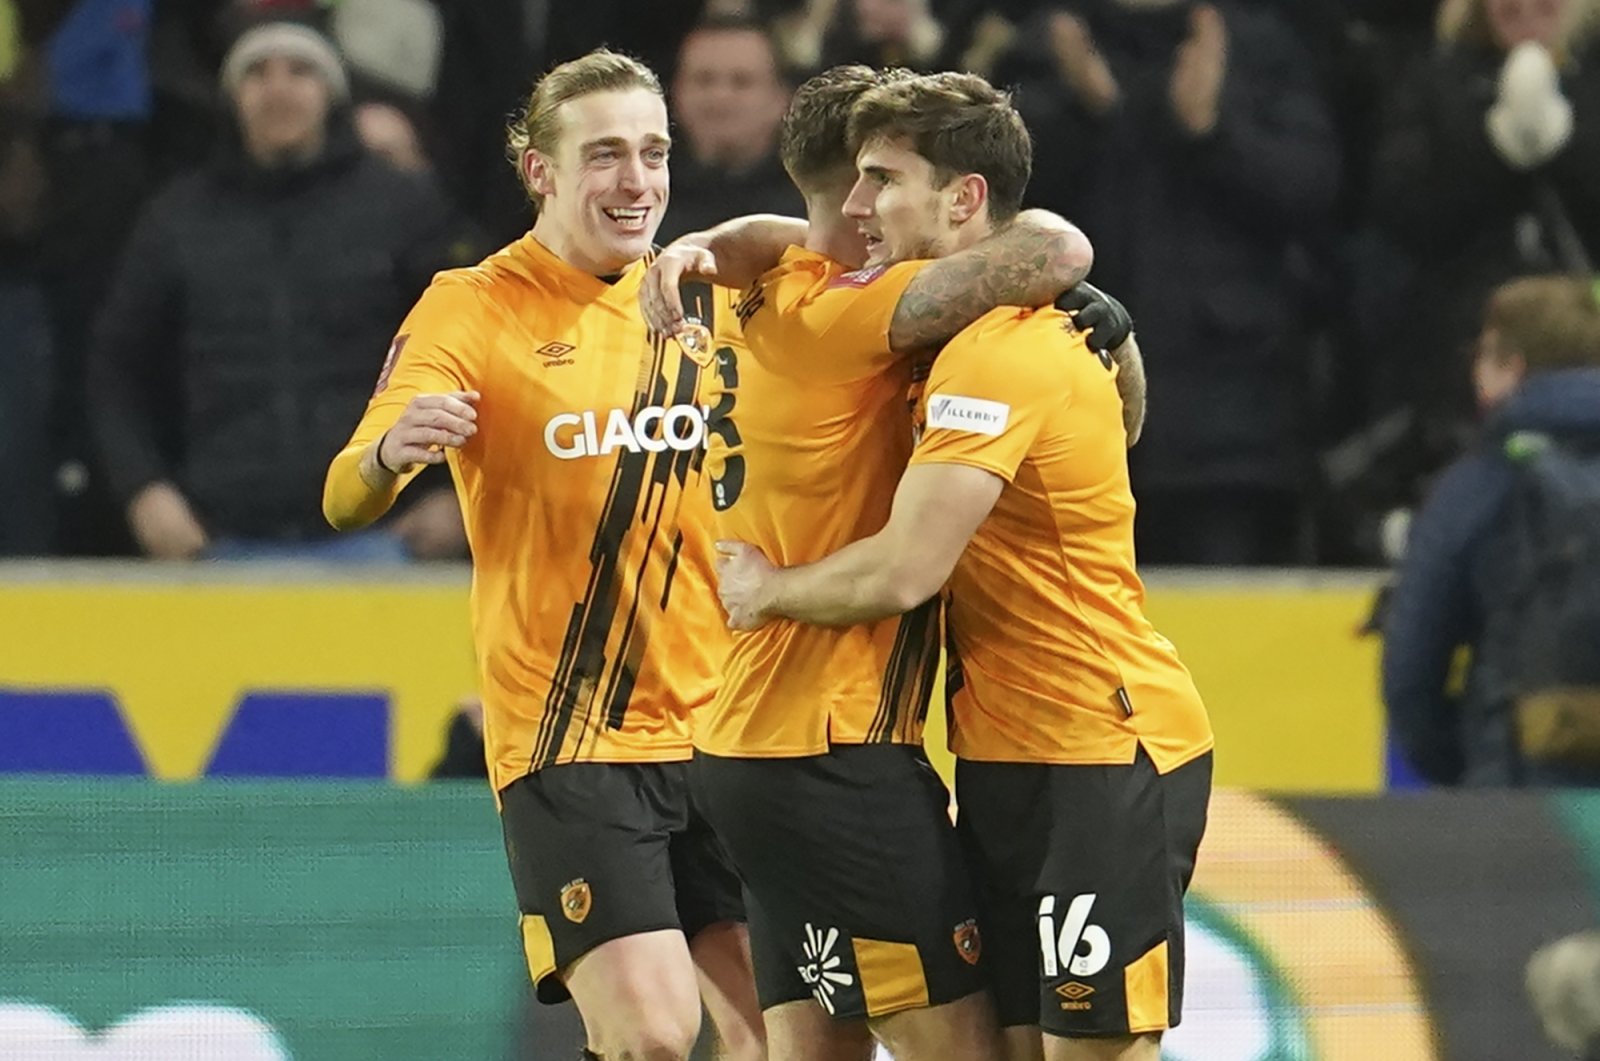 Hull City&#039;s Ryan Longman (R) celebrates after scoring a second goal during an FA Cup match against Everton, Hull, England, Jan. 8, 2022. (AP Photo)